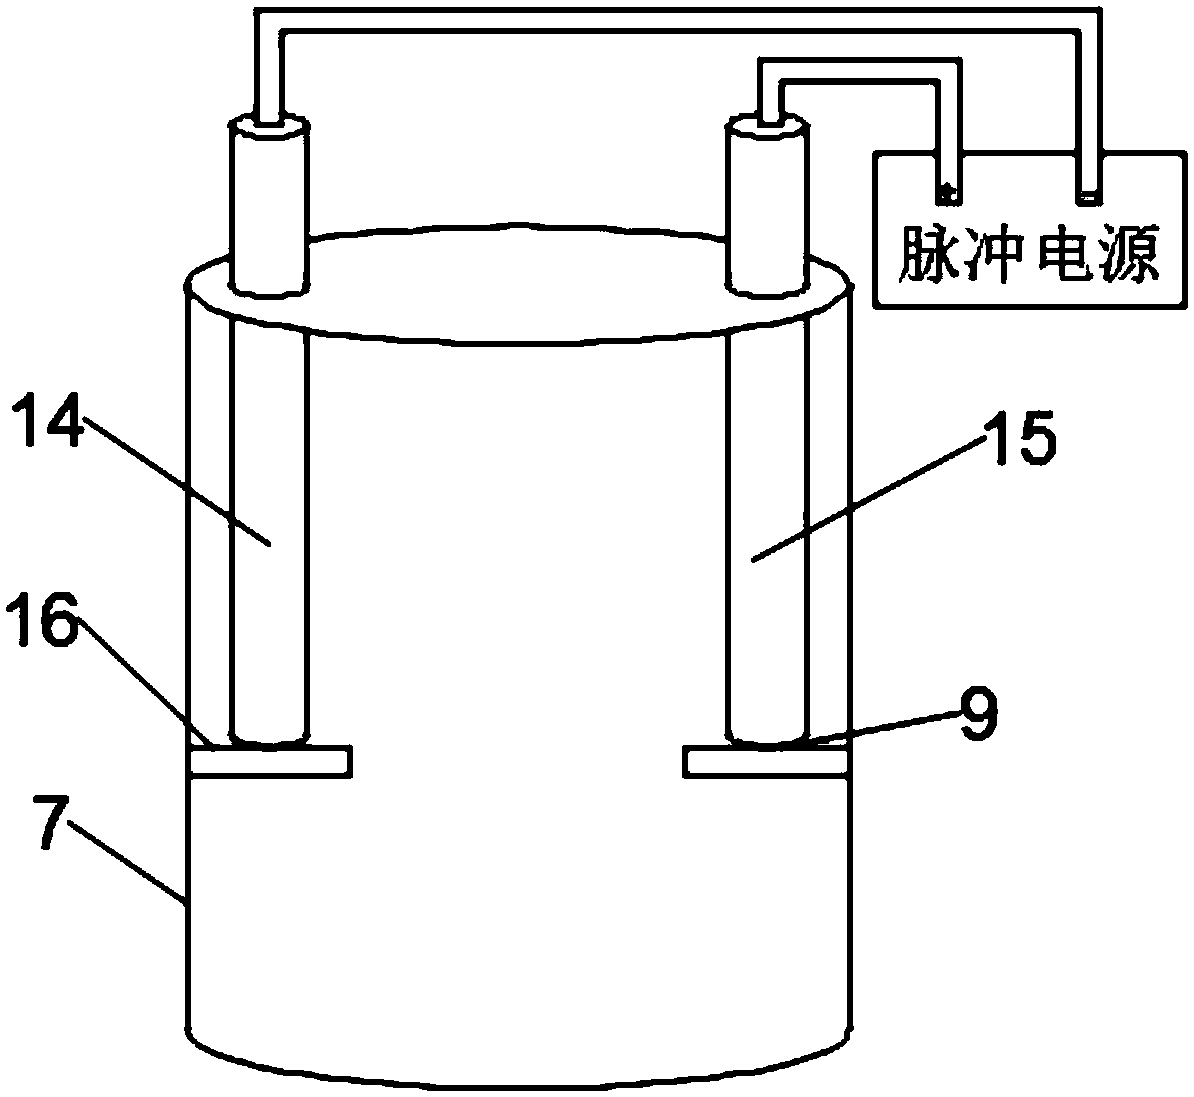 Wastewater purification and discharge treatment equipment